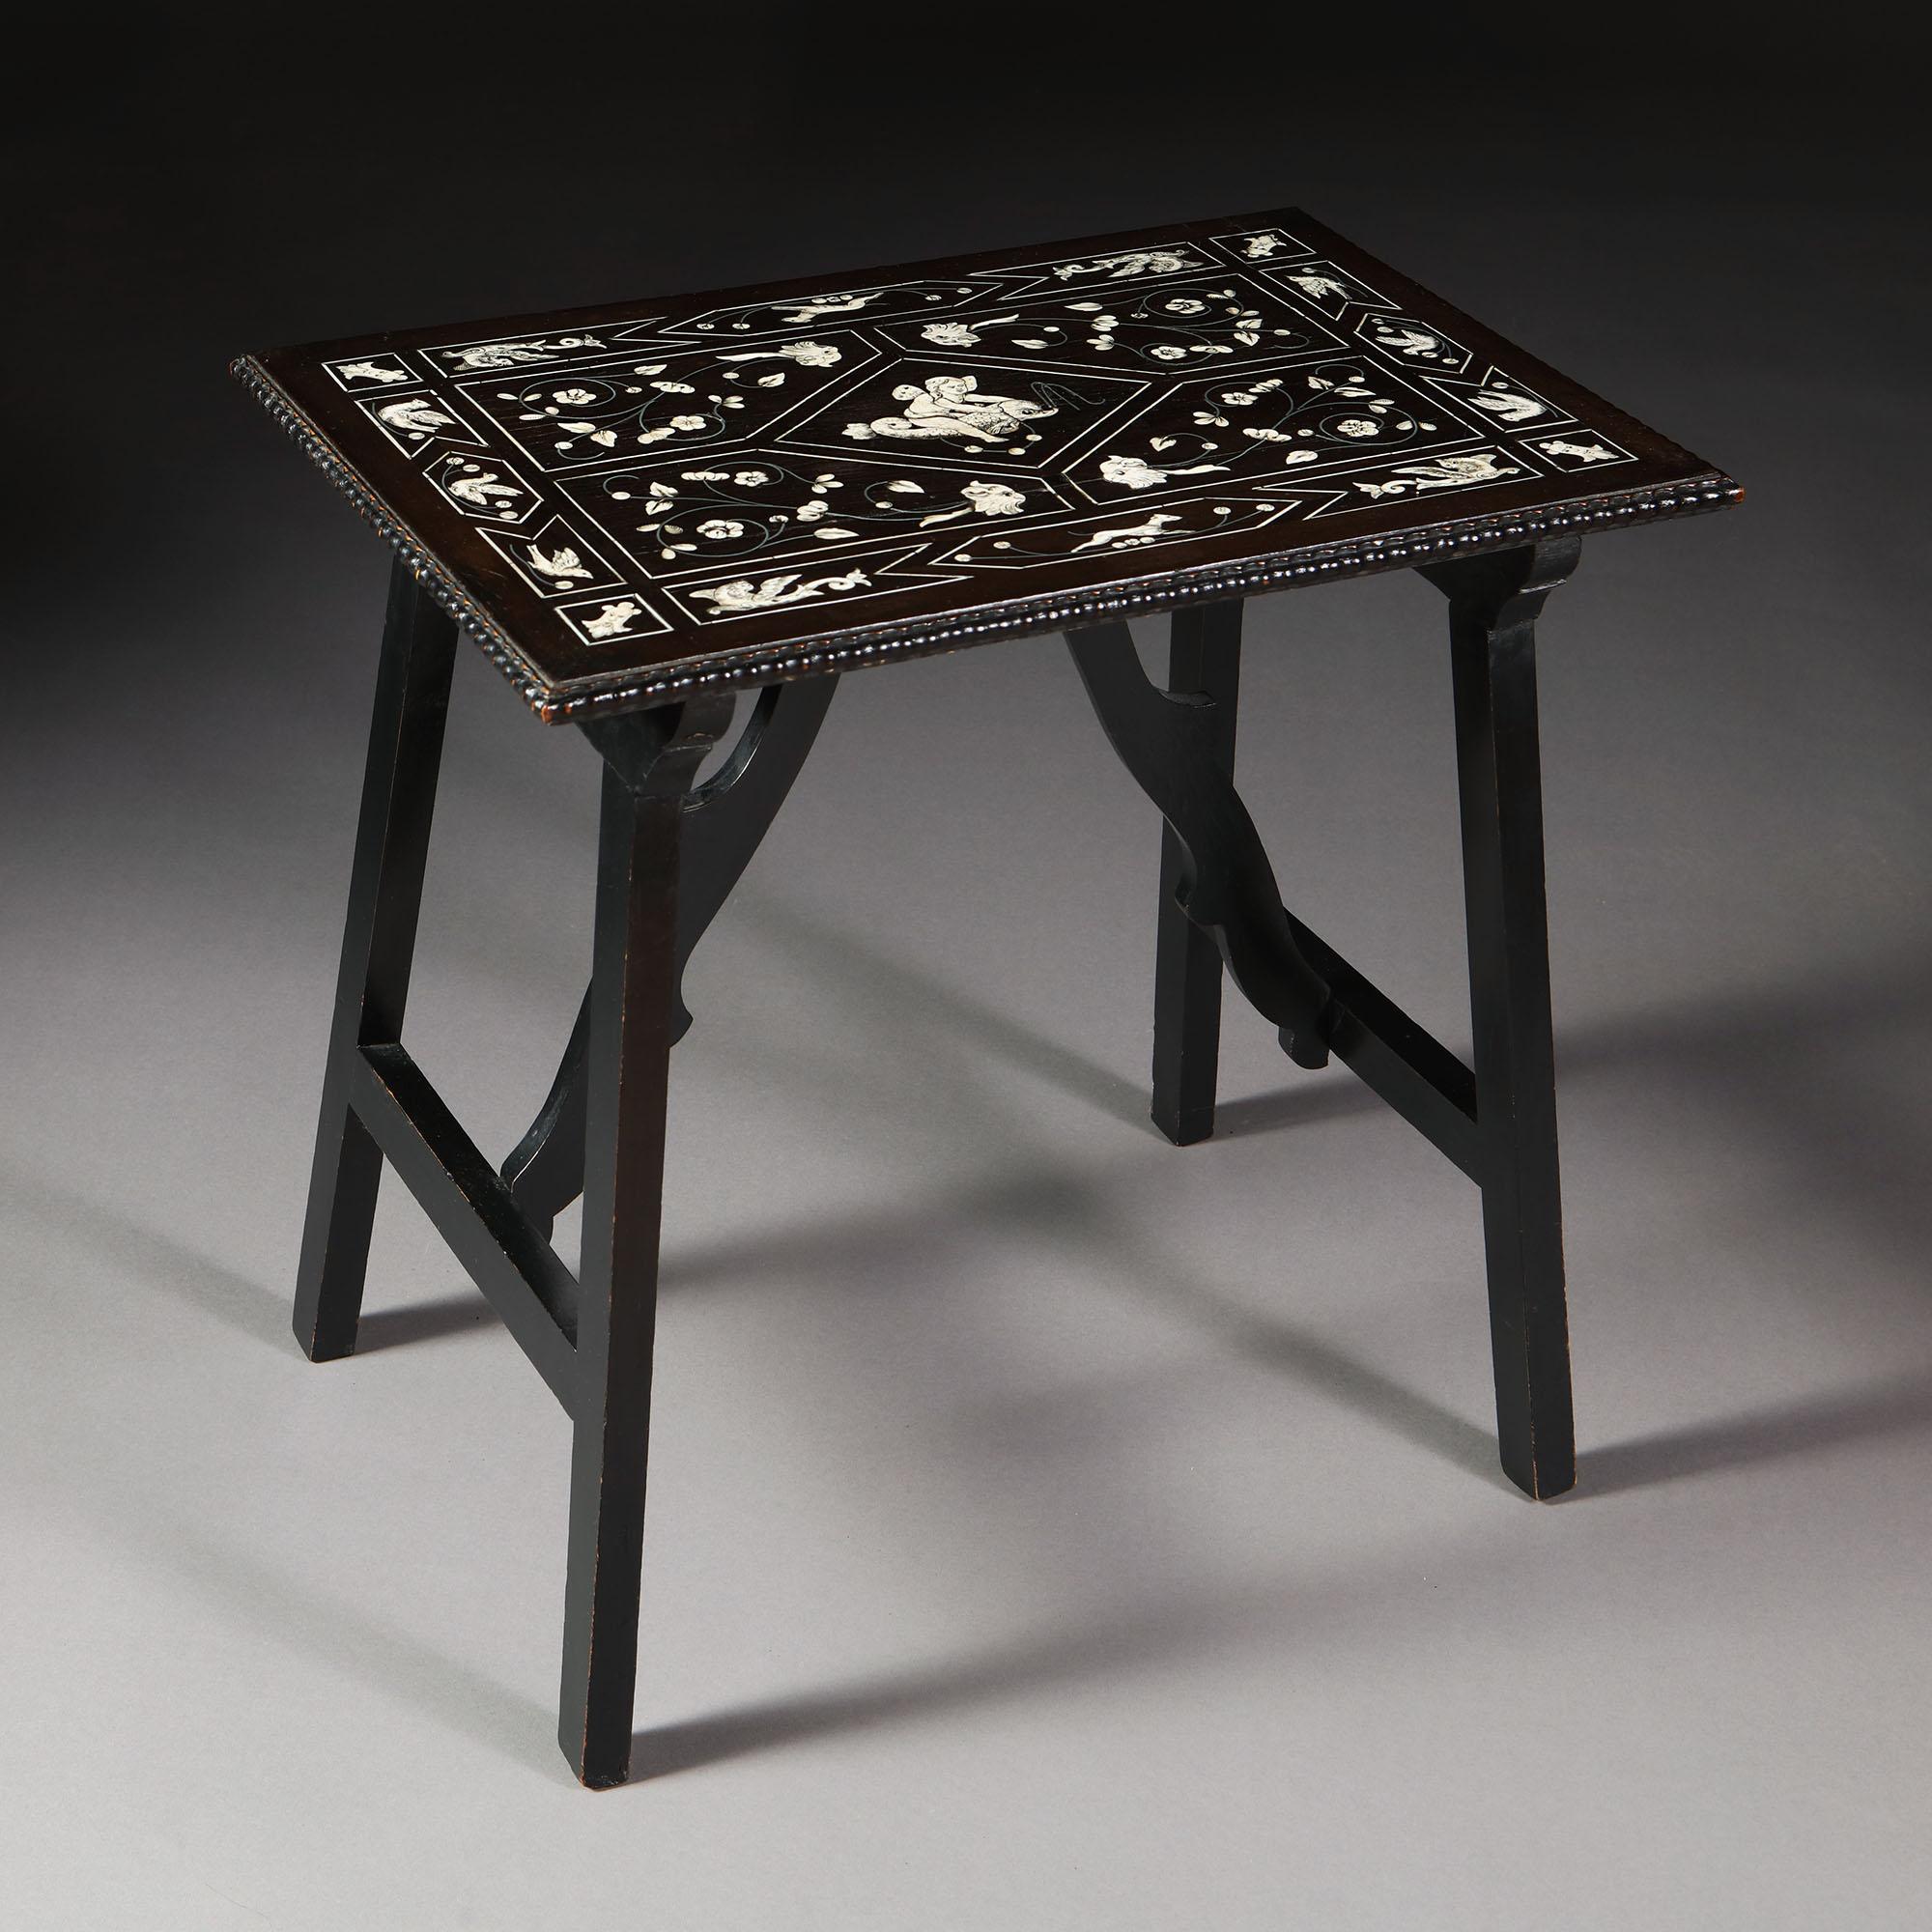 A mid nineteenth century Italian ebony side table, the top decorated with bone inlay, depicting masks, floral motives, and a central image of a cherub riding a dolphin, with unusual scrolling stretchers to the base.